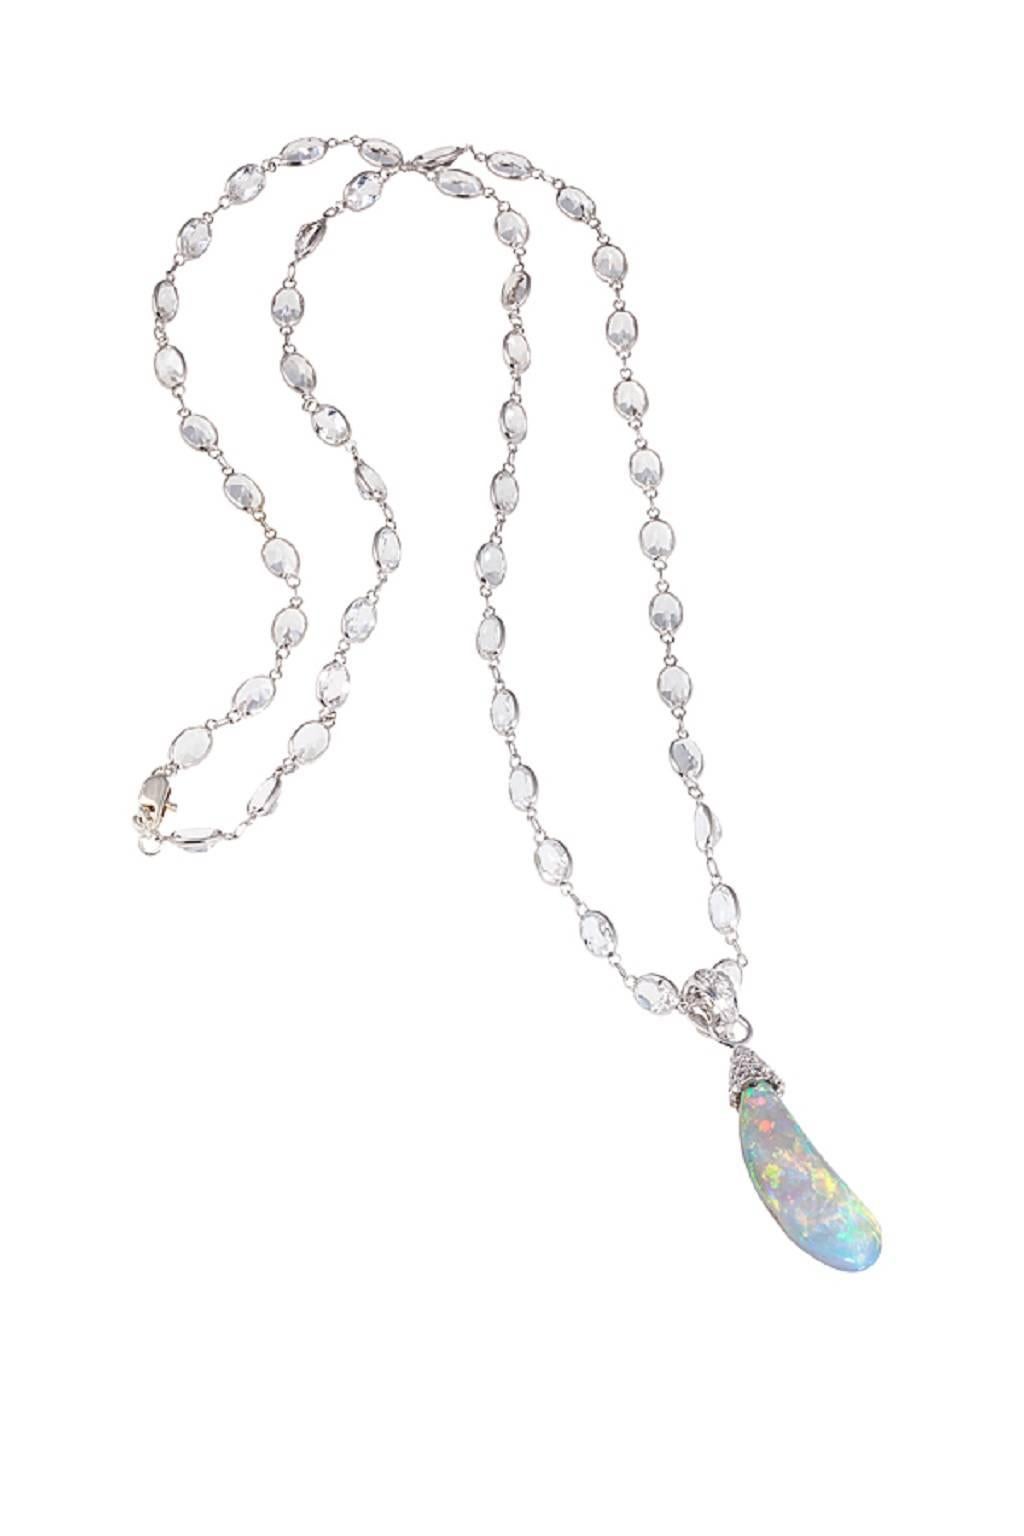 This delicate opal drop is nestled in a 18K White Gold diamond encrusted cap suspended on an 18 inch White Topaz chain. 9.61ct Lightning Ridge Opal with 0.26ct Diamonds.